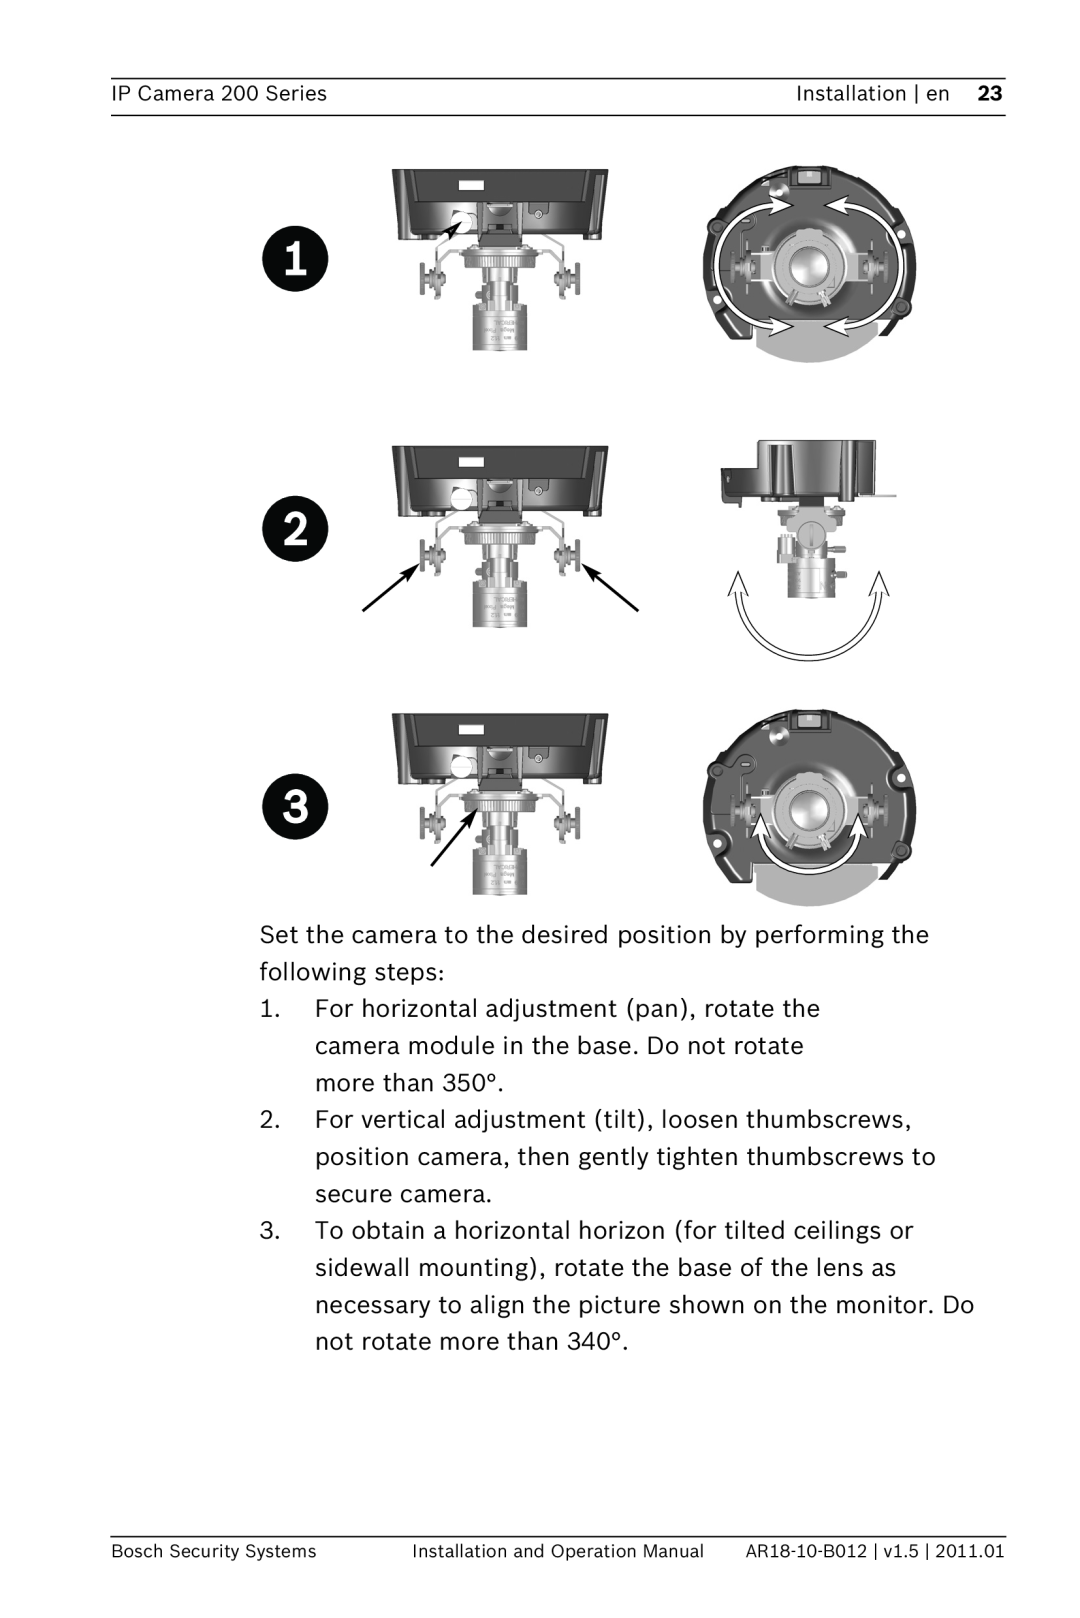 Bosch Appliances NDC-265-P operation manual Set the camera to the desired position by performing the following steps 